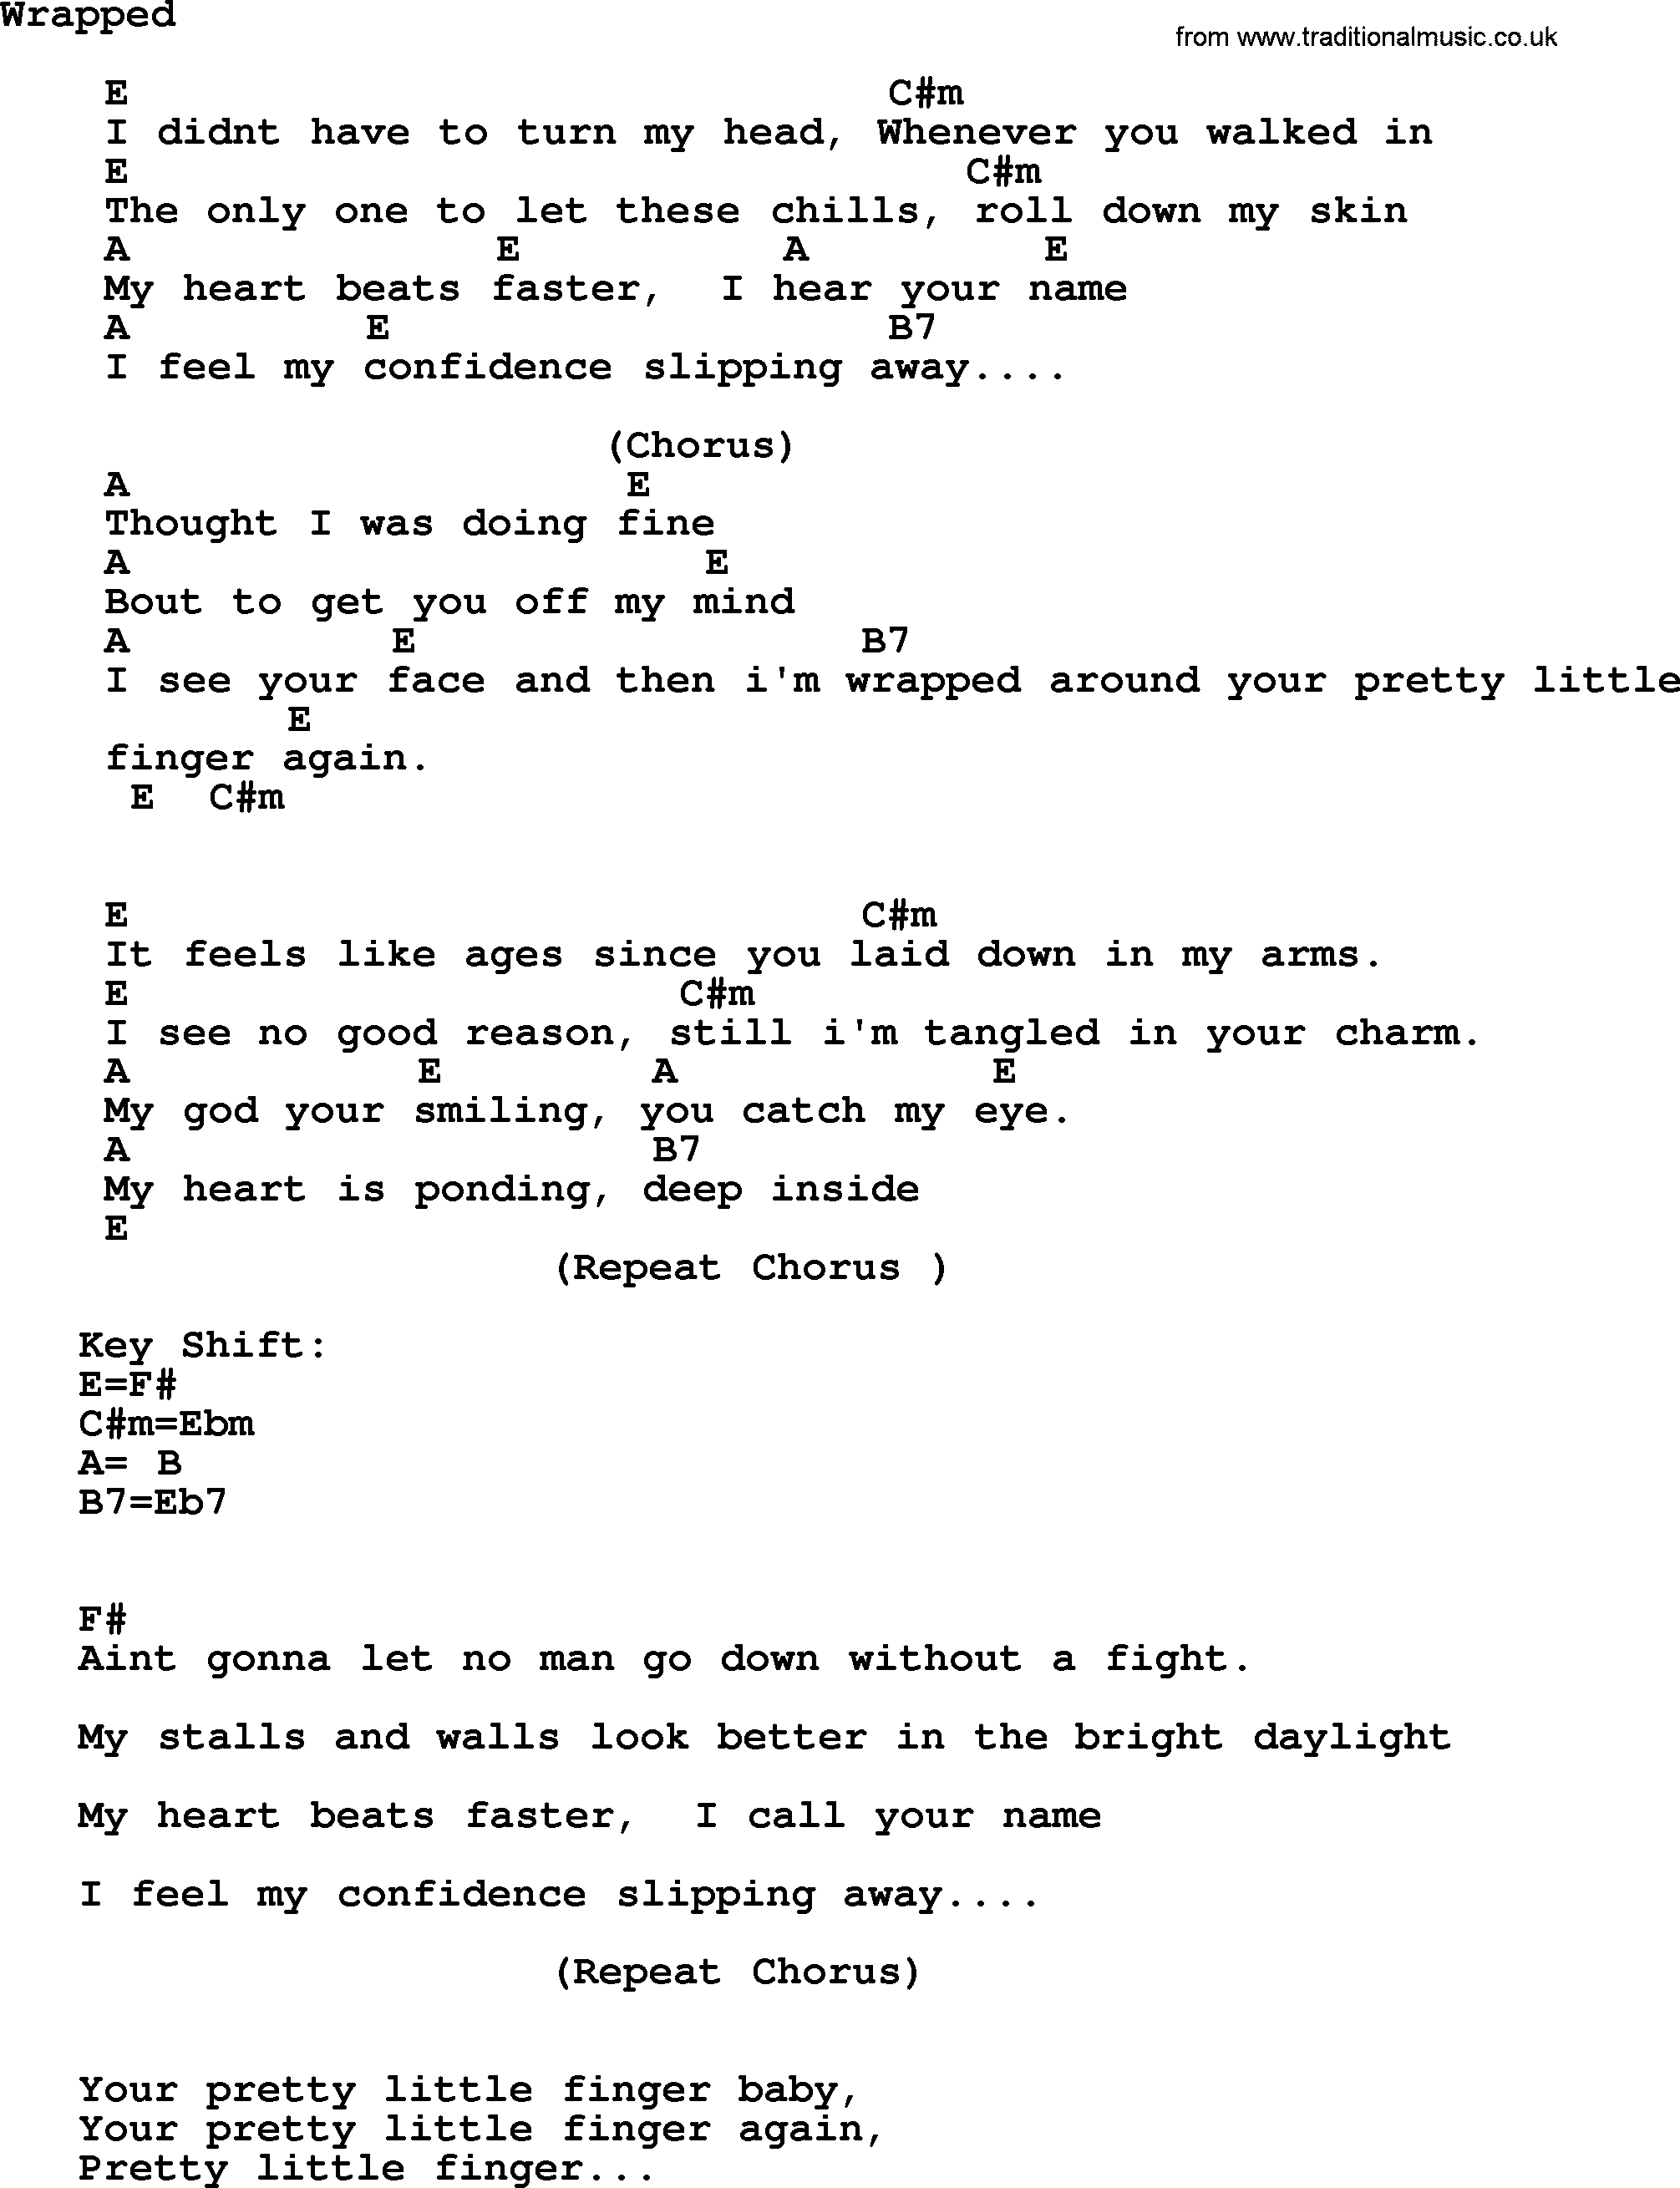 George Strait song: Wrapped, lyrics and chords